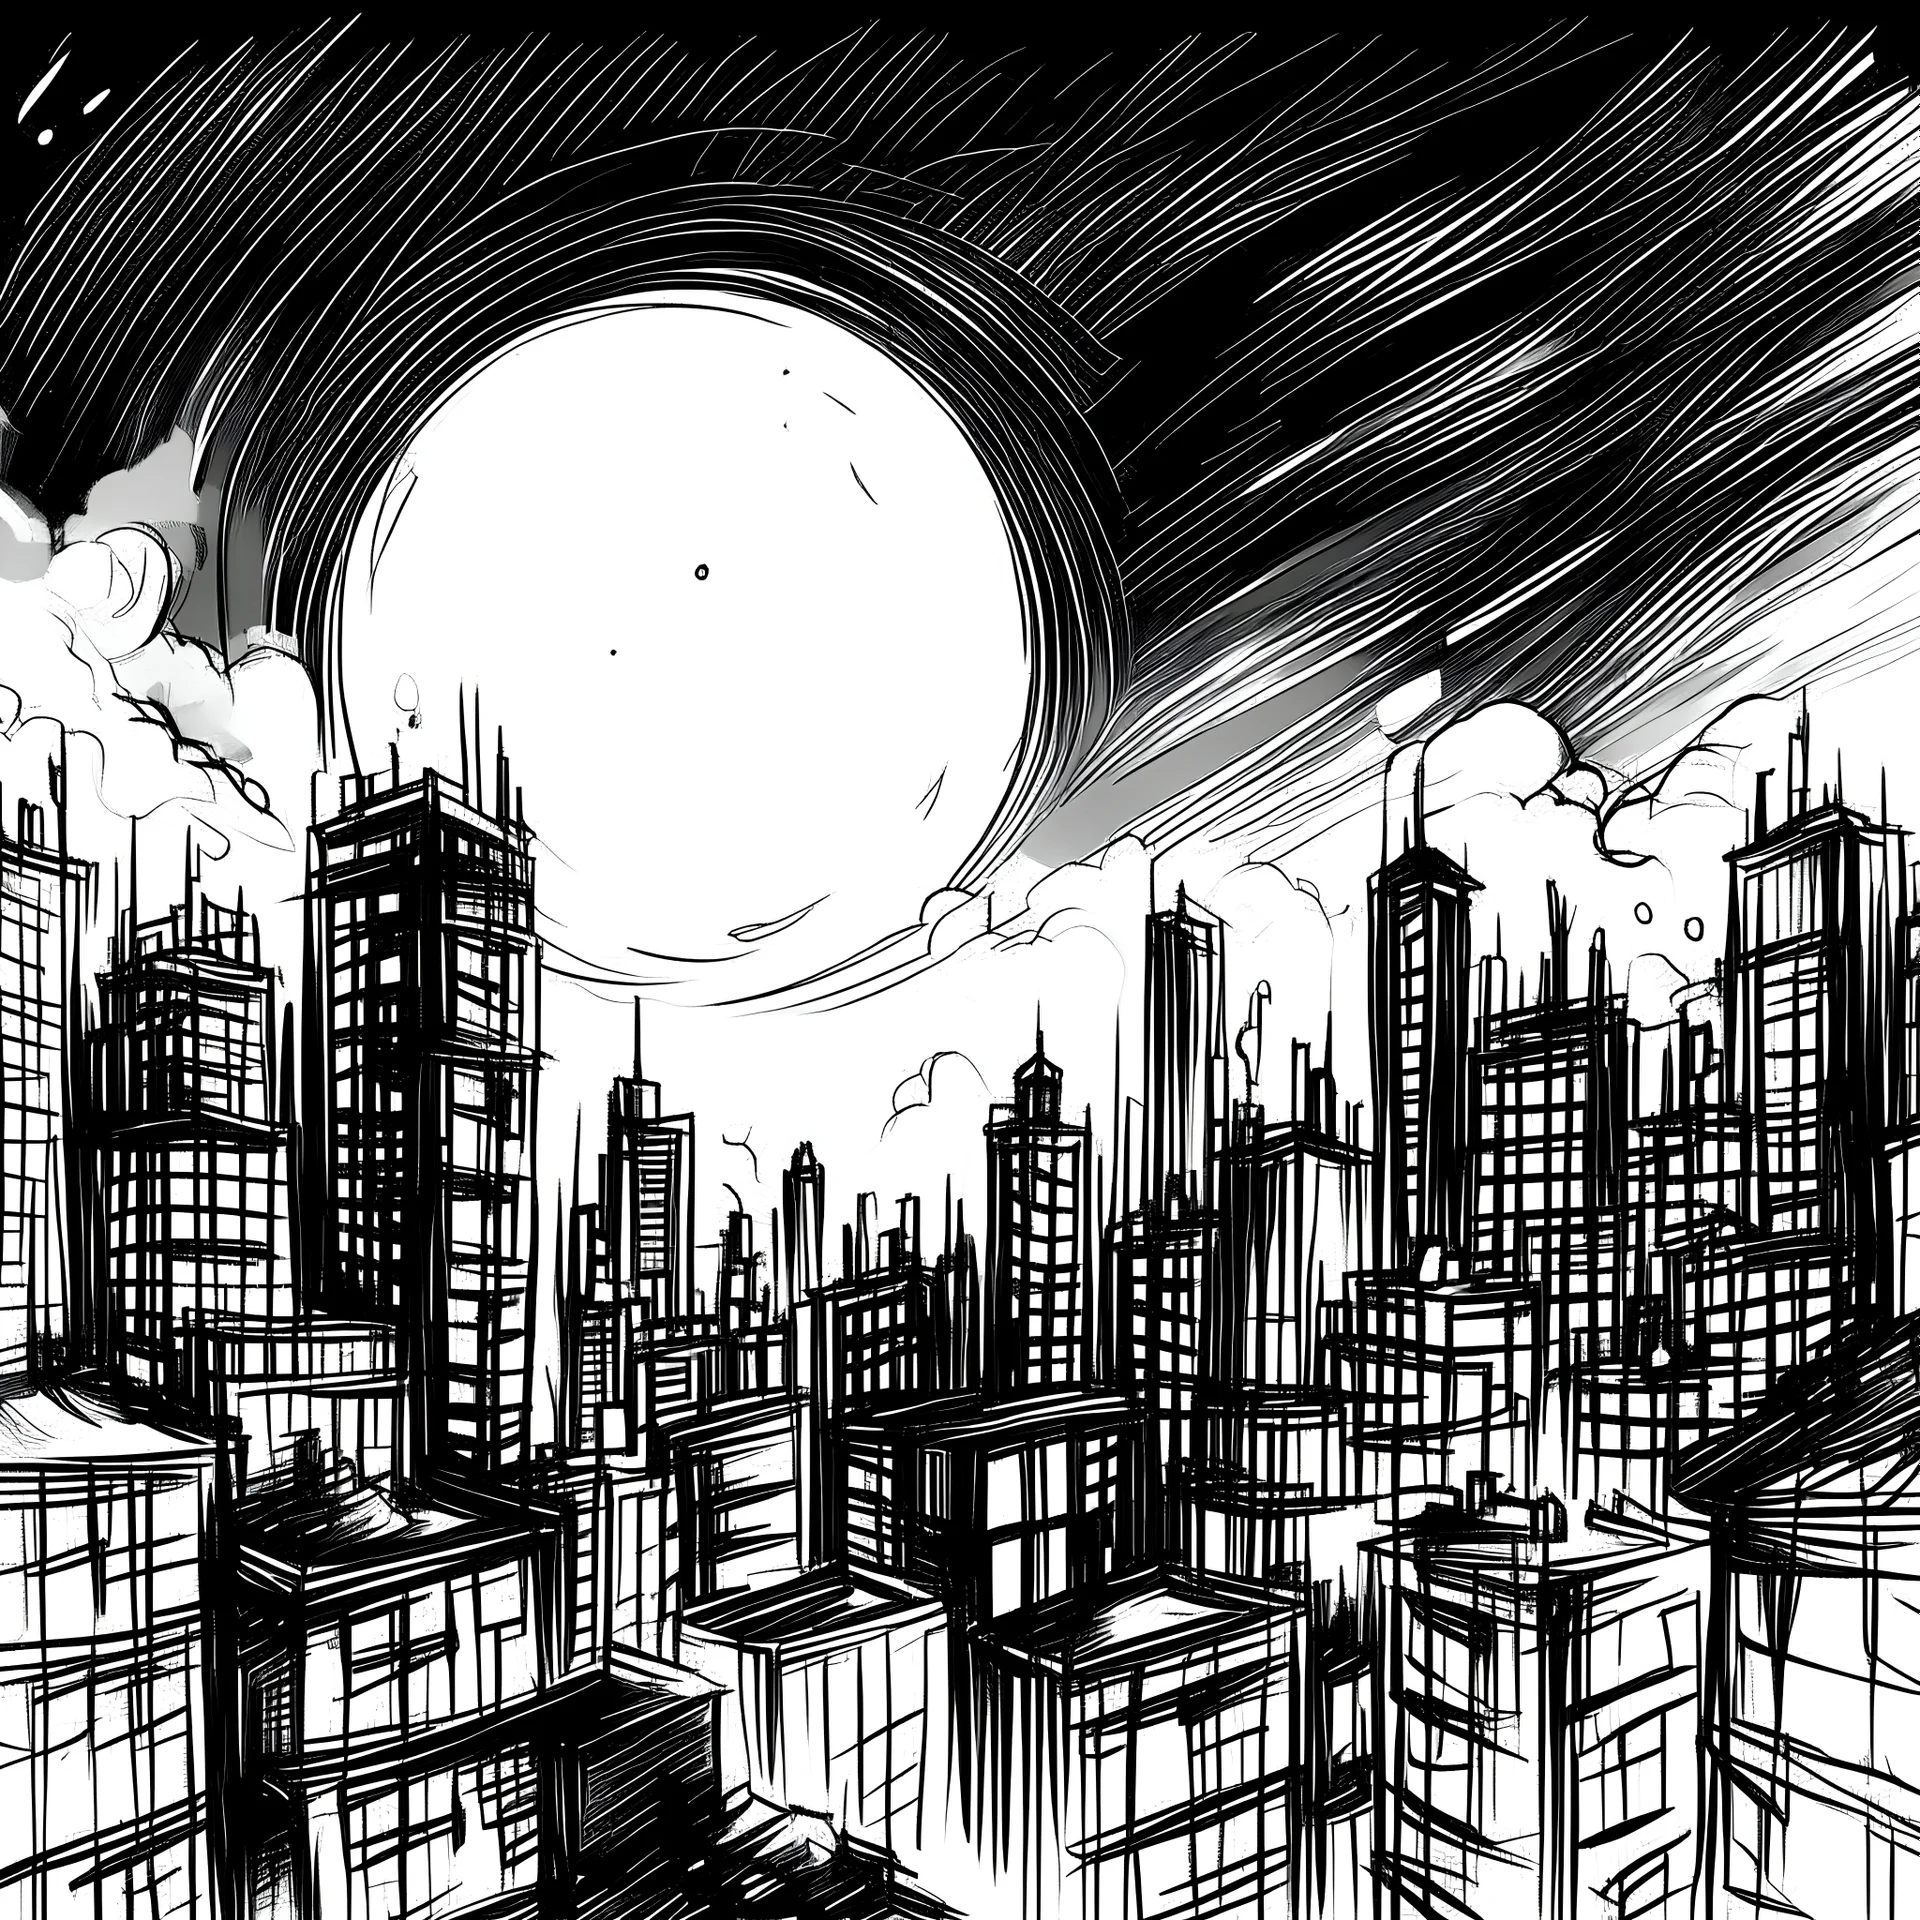 Sketch art, bold outlines, clean and clear outlines, city lights and a sky with a small moon